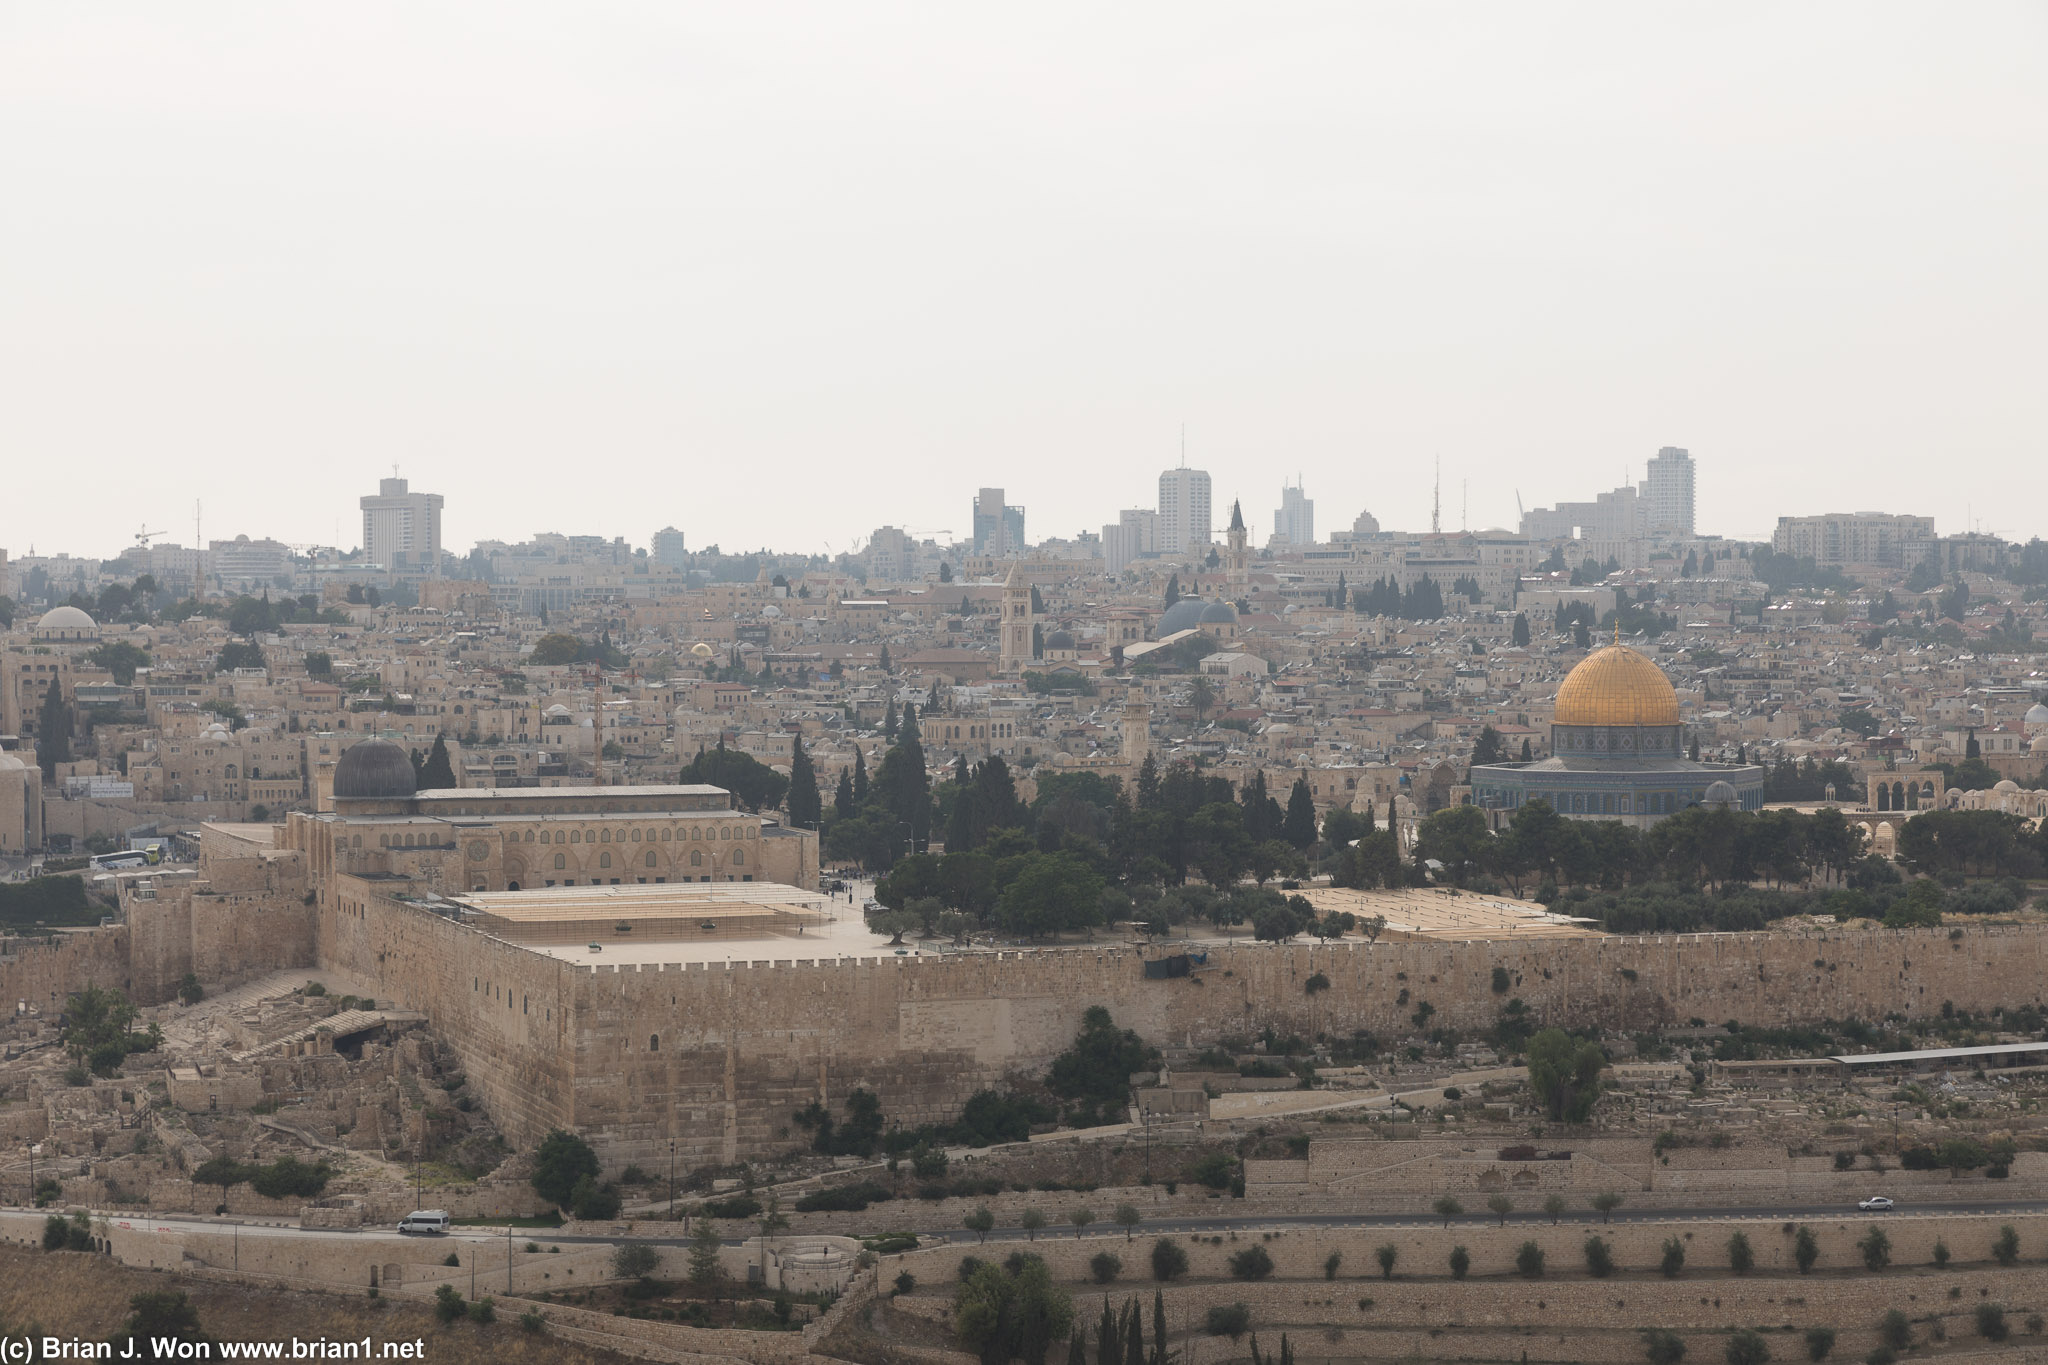 The golden dome of Temple Mount.